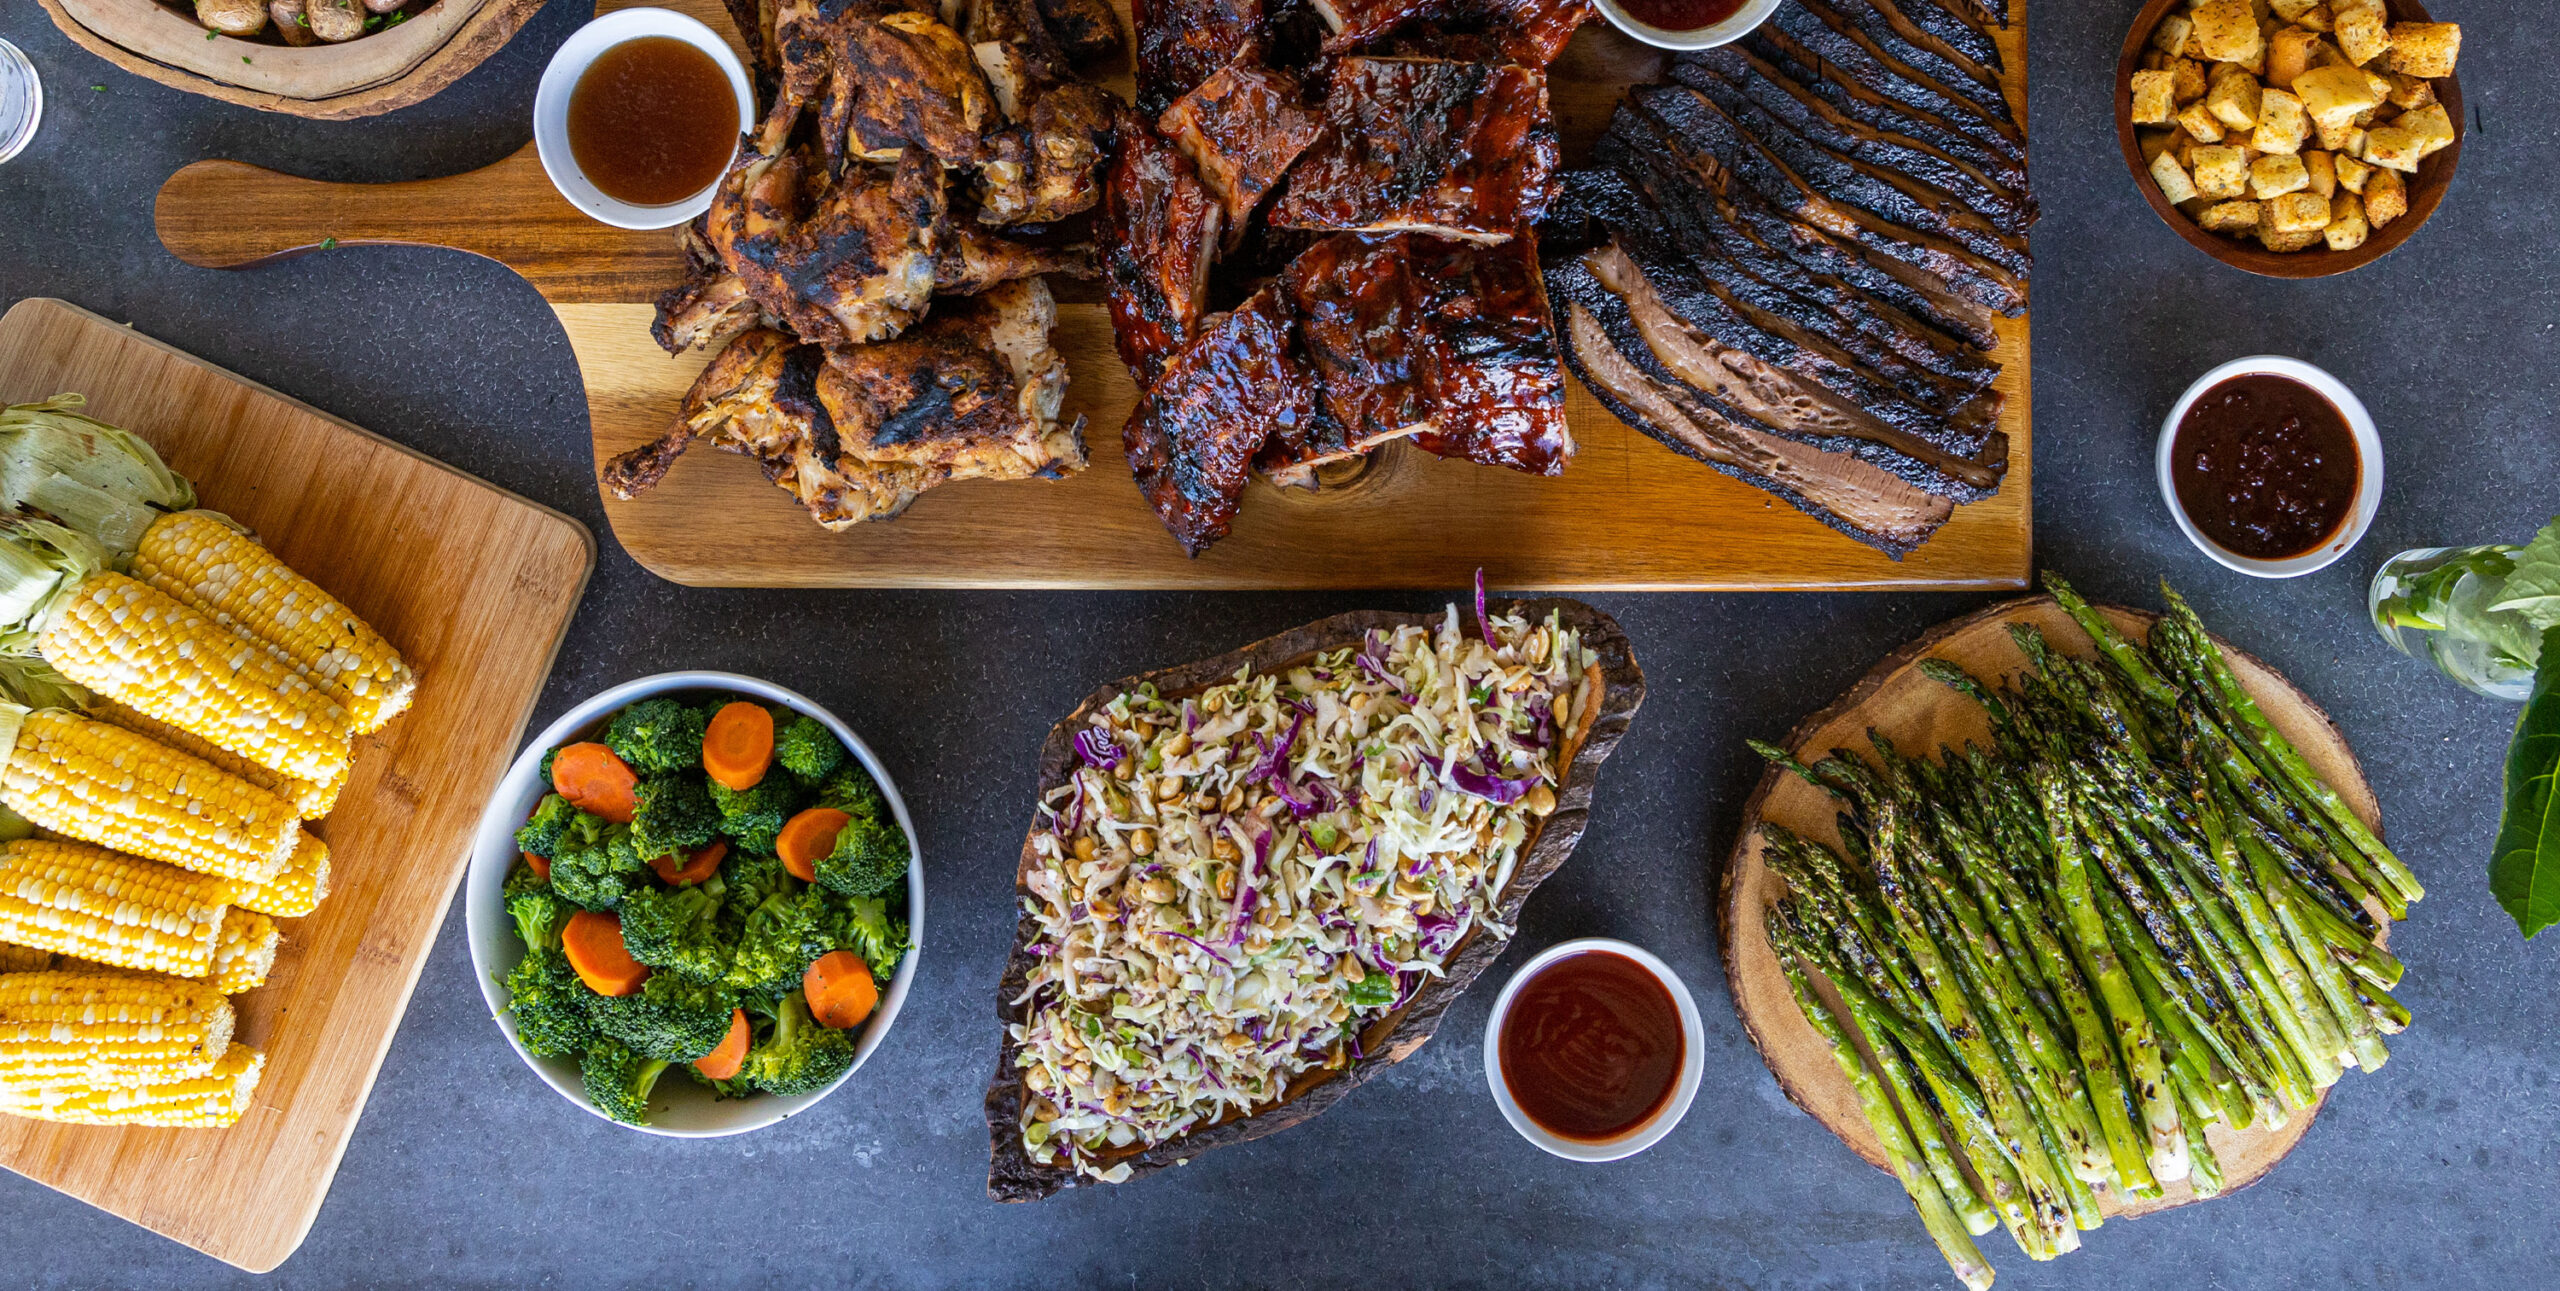 A table spread with an assortment of barbecued foods including grilled chicken, ribs, brisket, corn on the cob, coleslaw, roasted asparagus, and croutons, all beautifully presented on wooden boards and bowls, ready for a feast